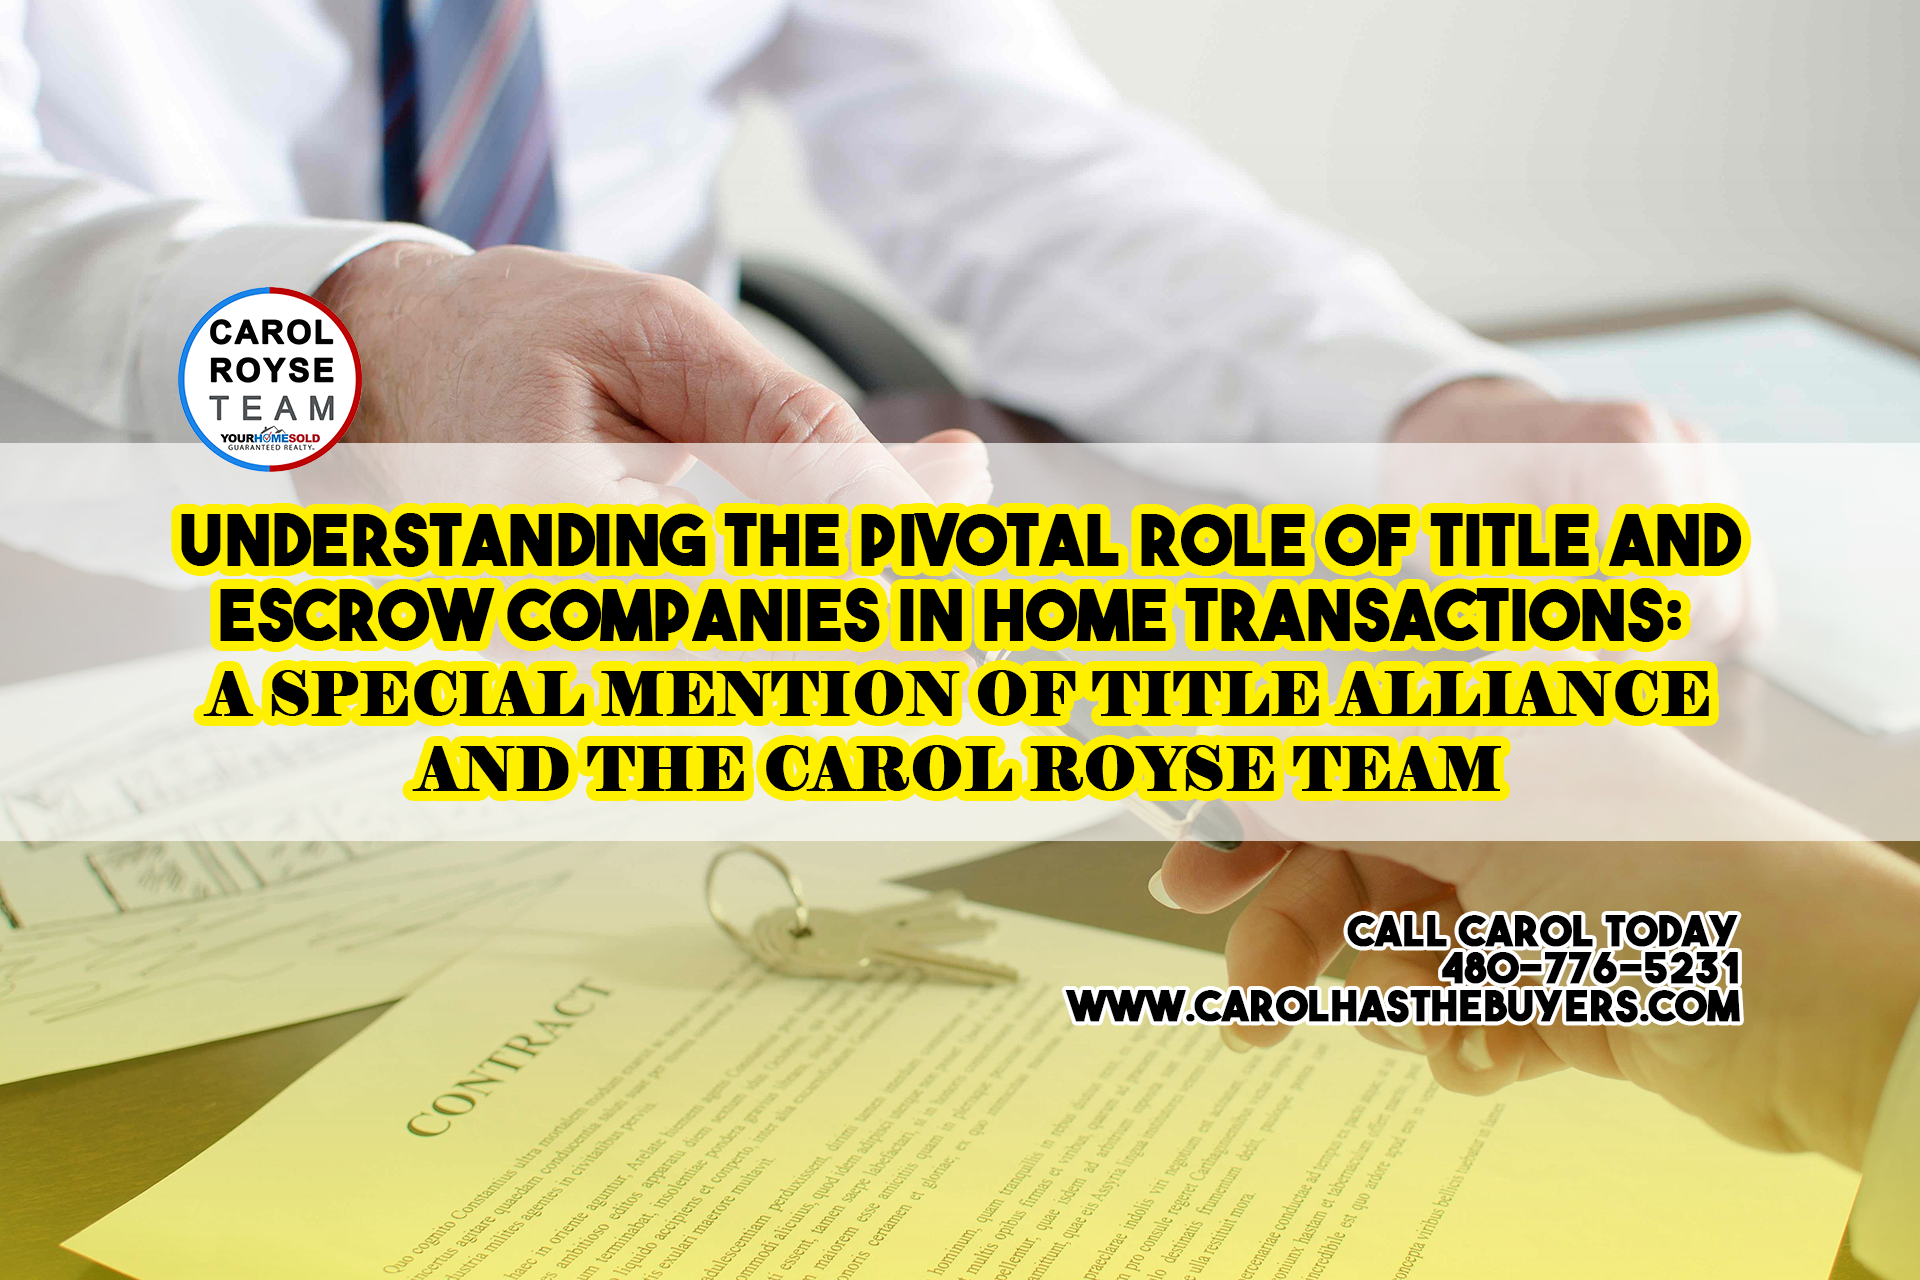 Understanding the Pivotal Role of Title and Escrow Companies in Home Transactions: A Special Mention of Title Alliance and The Carol Royse Team